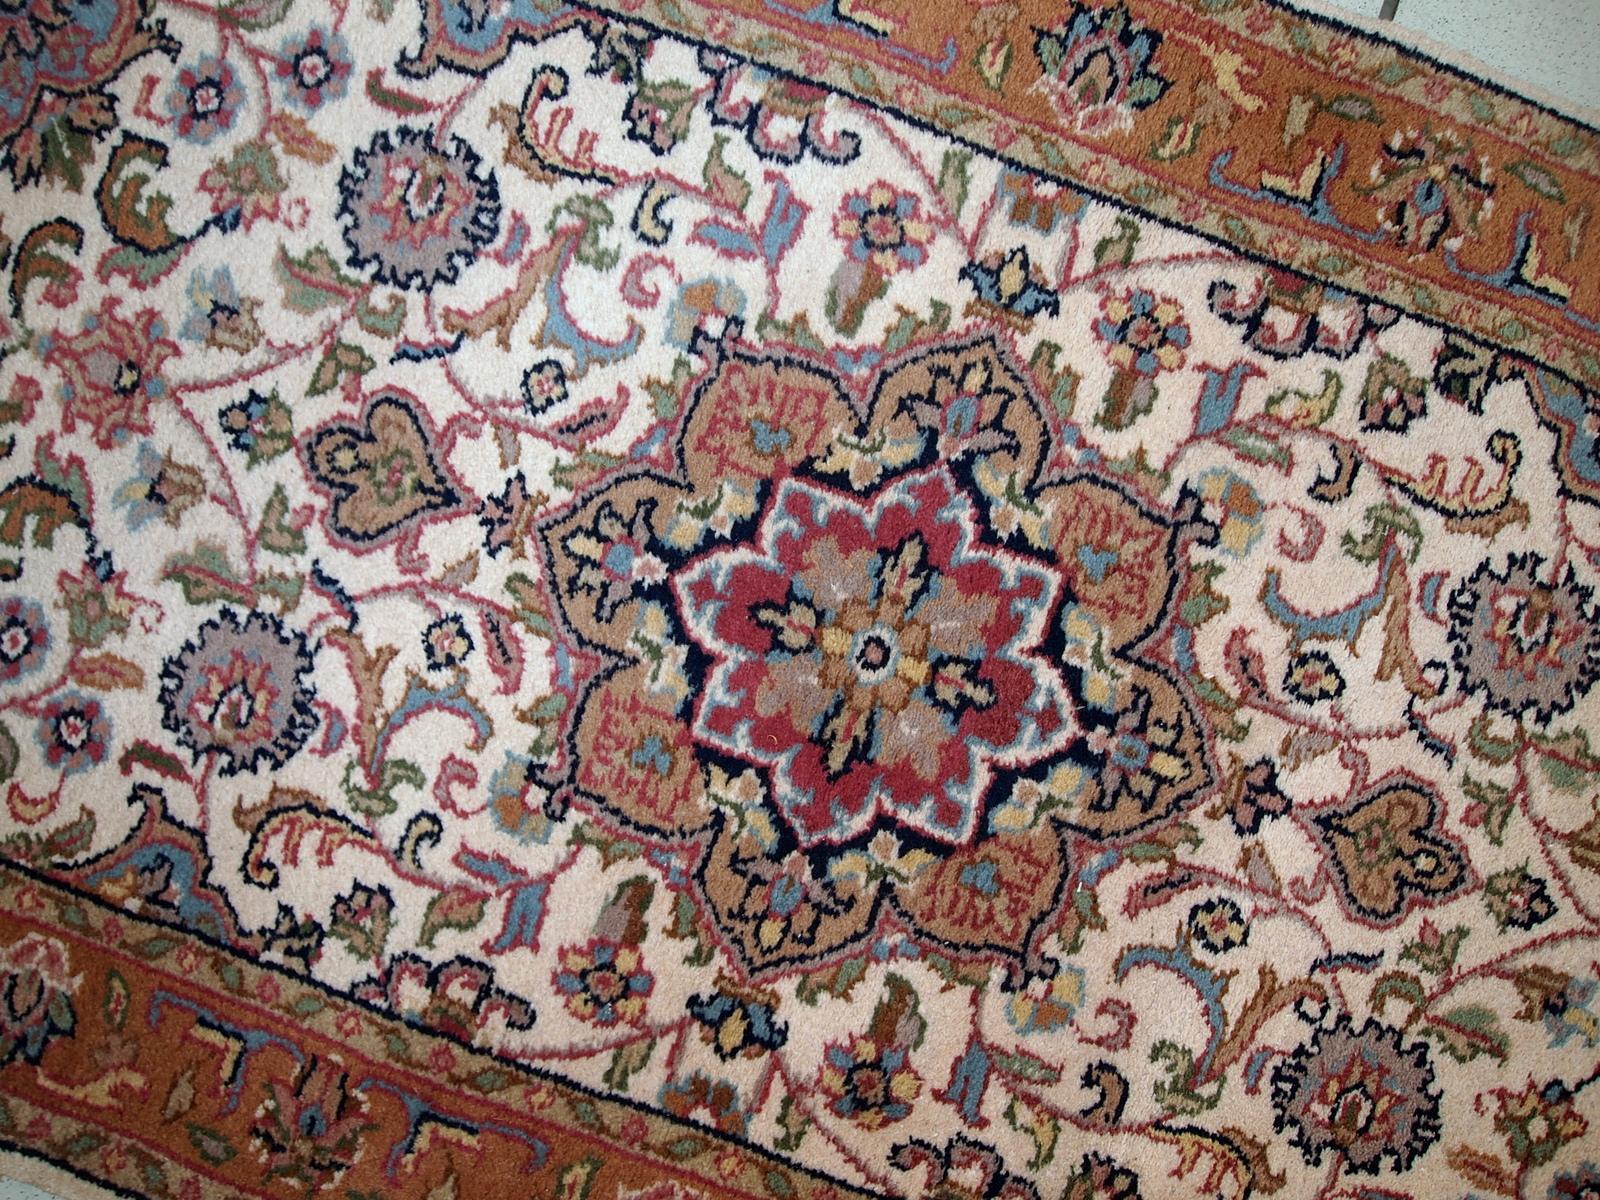 Vintage Indo-Tabriz rug in original good condition. This rug has been made in the middle of 20th century in India.

-condition: original good, 

-circa 1970s,

-size: 2.4' x 4.8' (74cm x 146cm),

-material: wool,

-country of origin: